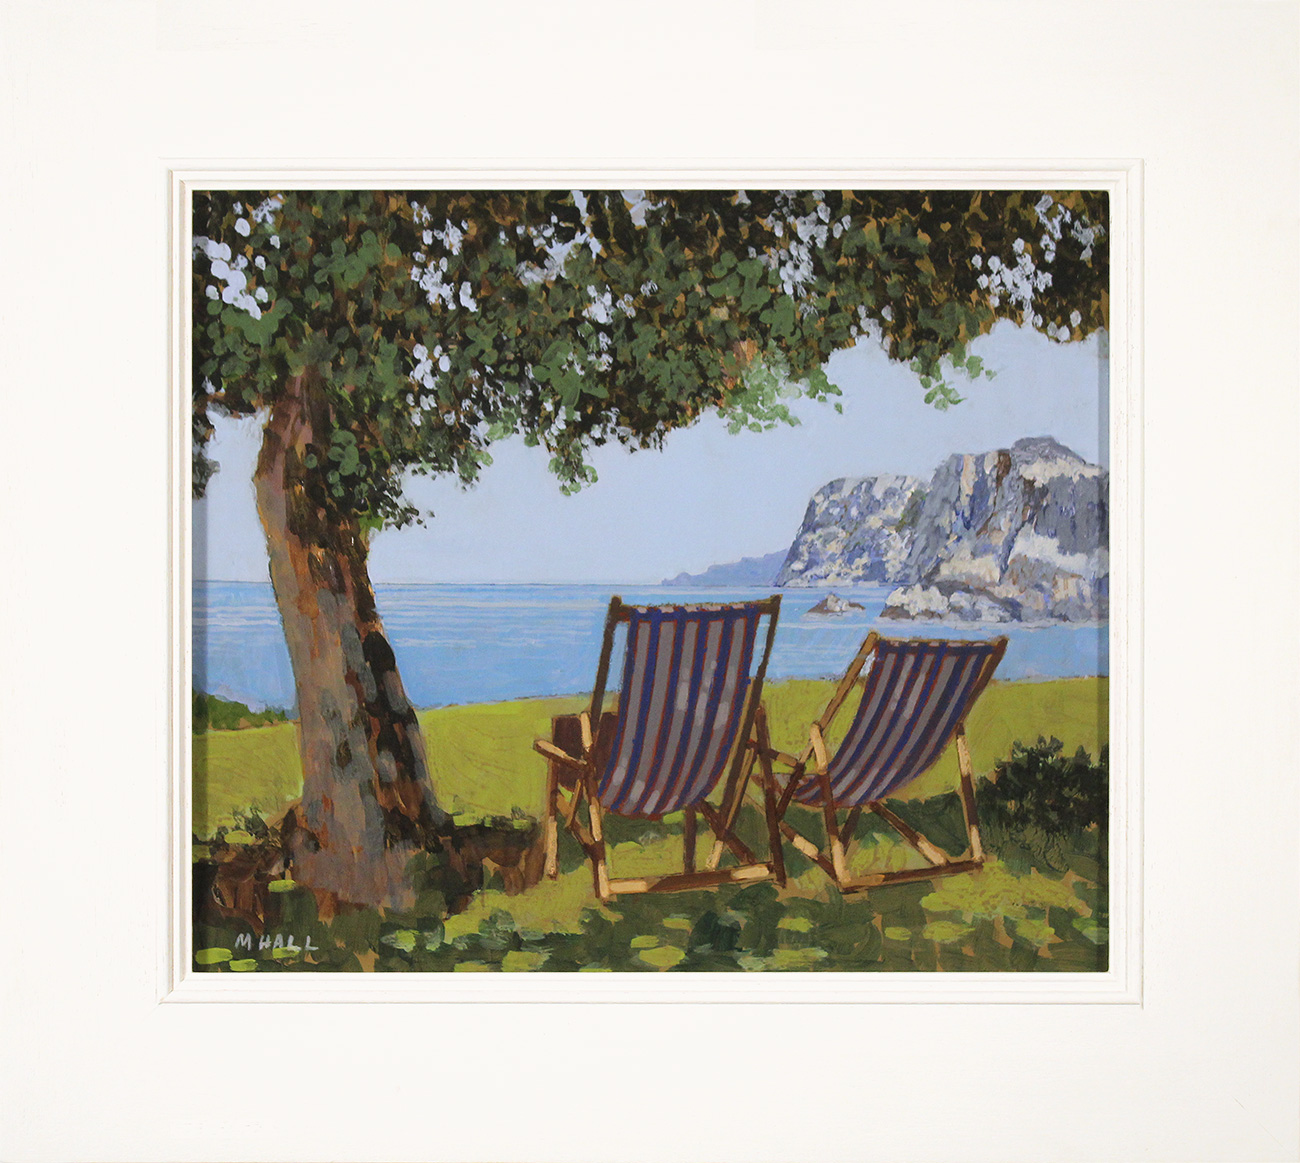 Mike Hall, Original acrylic painting on board, Two Striped Deck Chairs. Click to enlarge